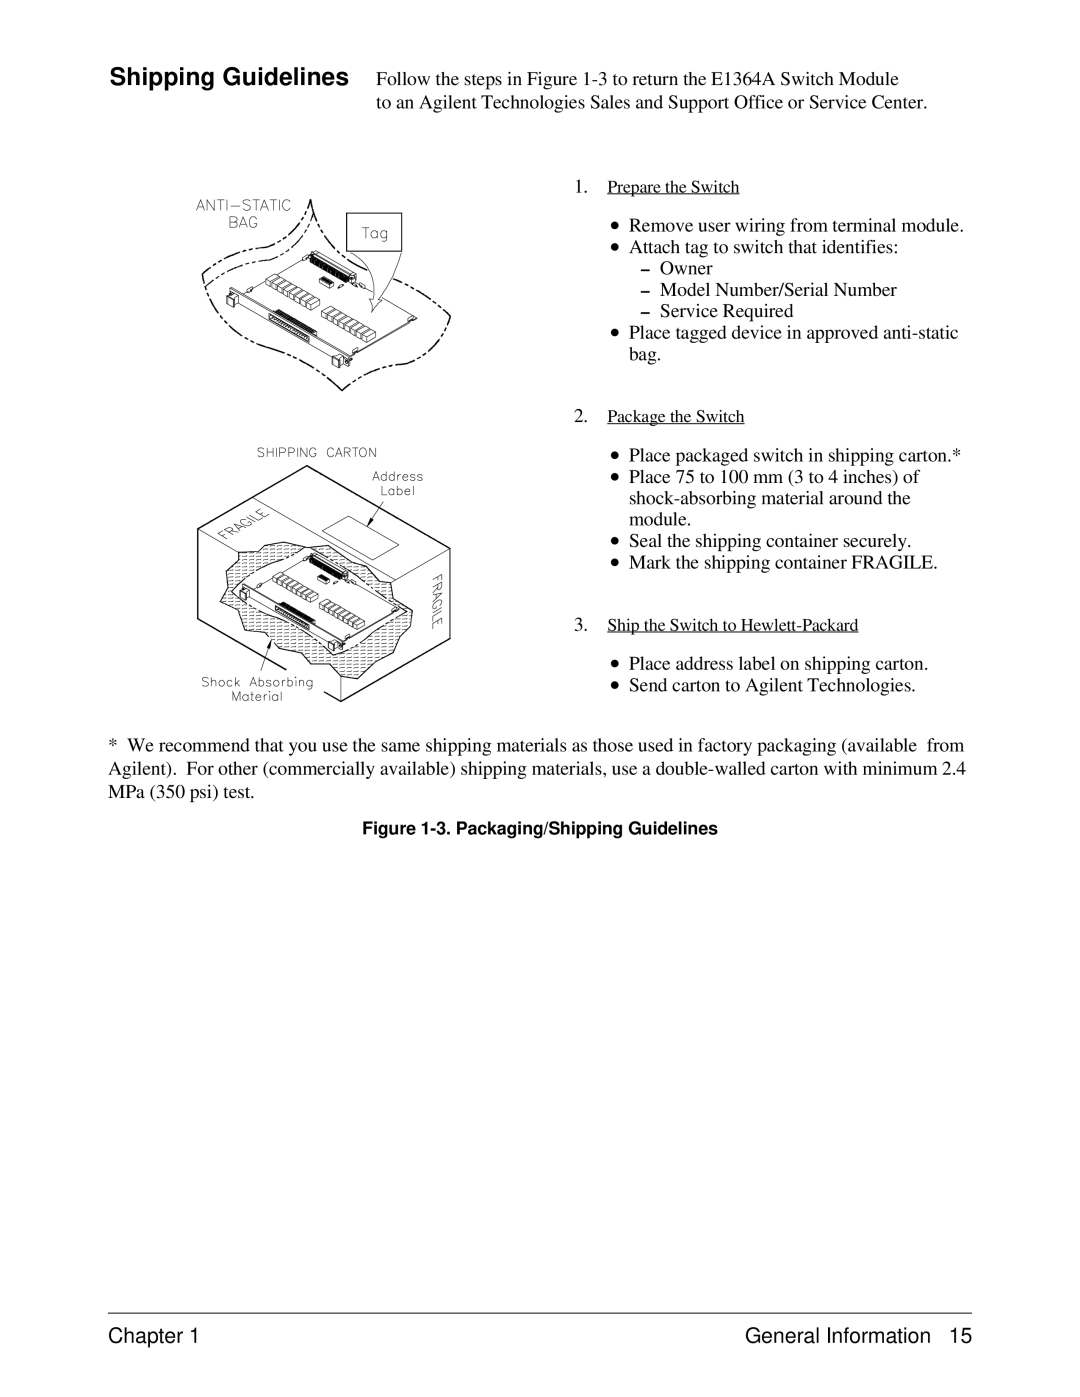 Agilent Technologies E1364A service manual Packaging/Shipping Guidelines 